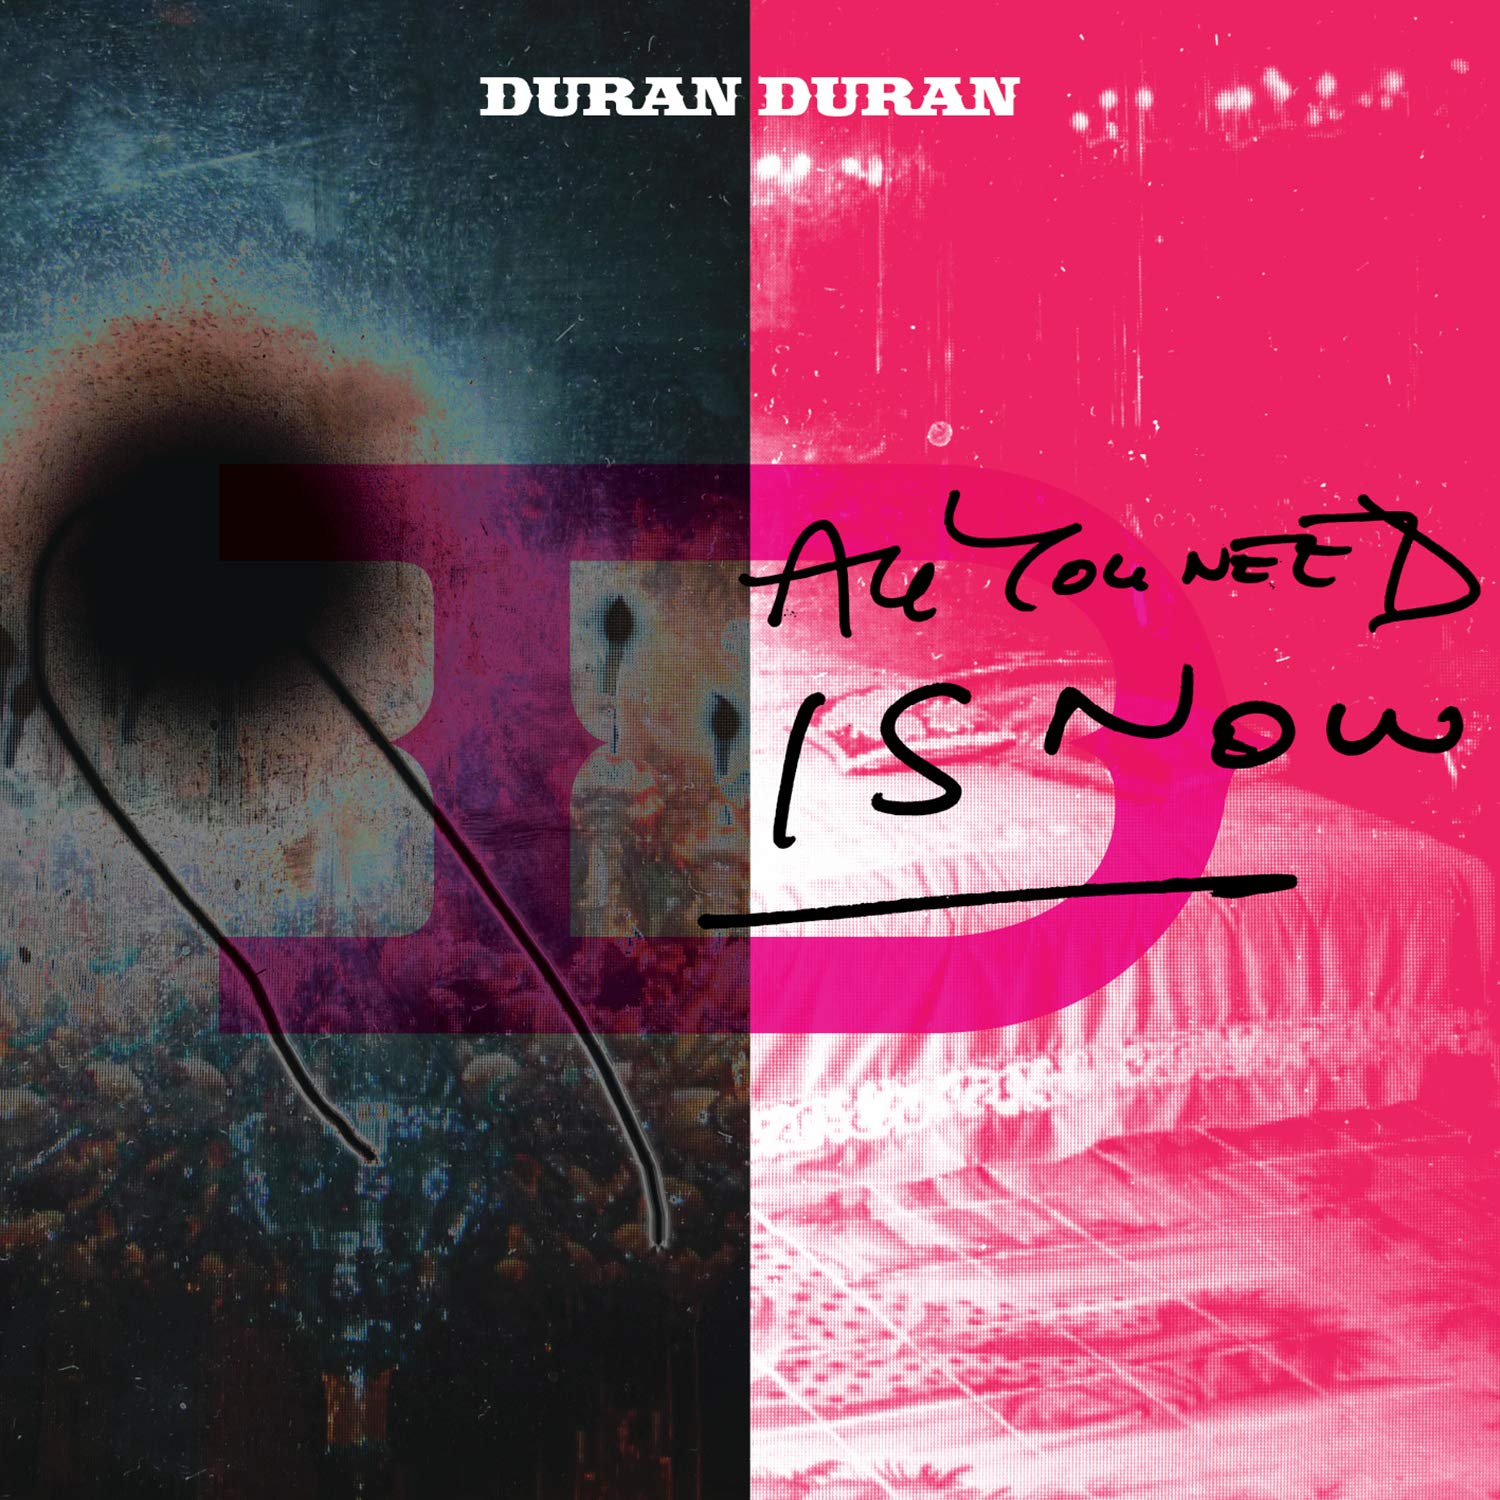 Duran Duran- All You Need Is Now (RSD Essential) - Darkside Records